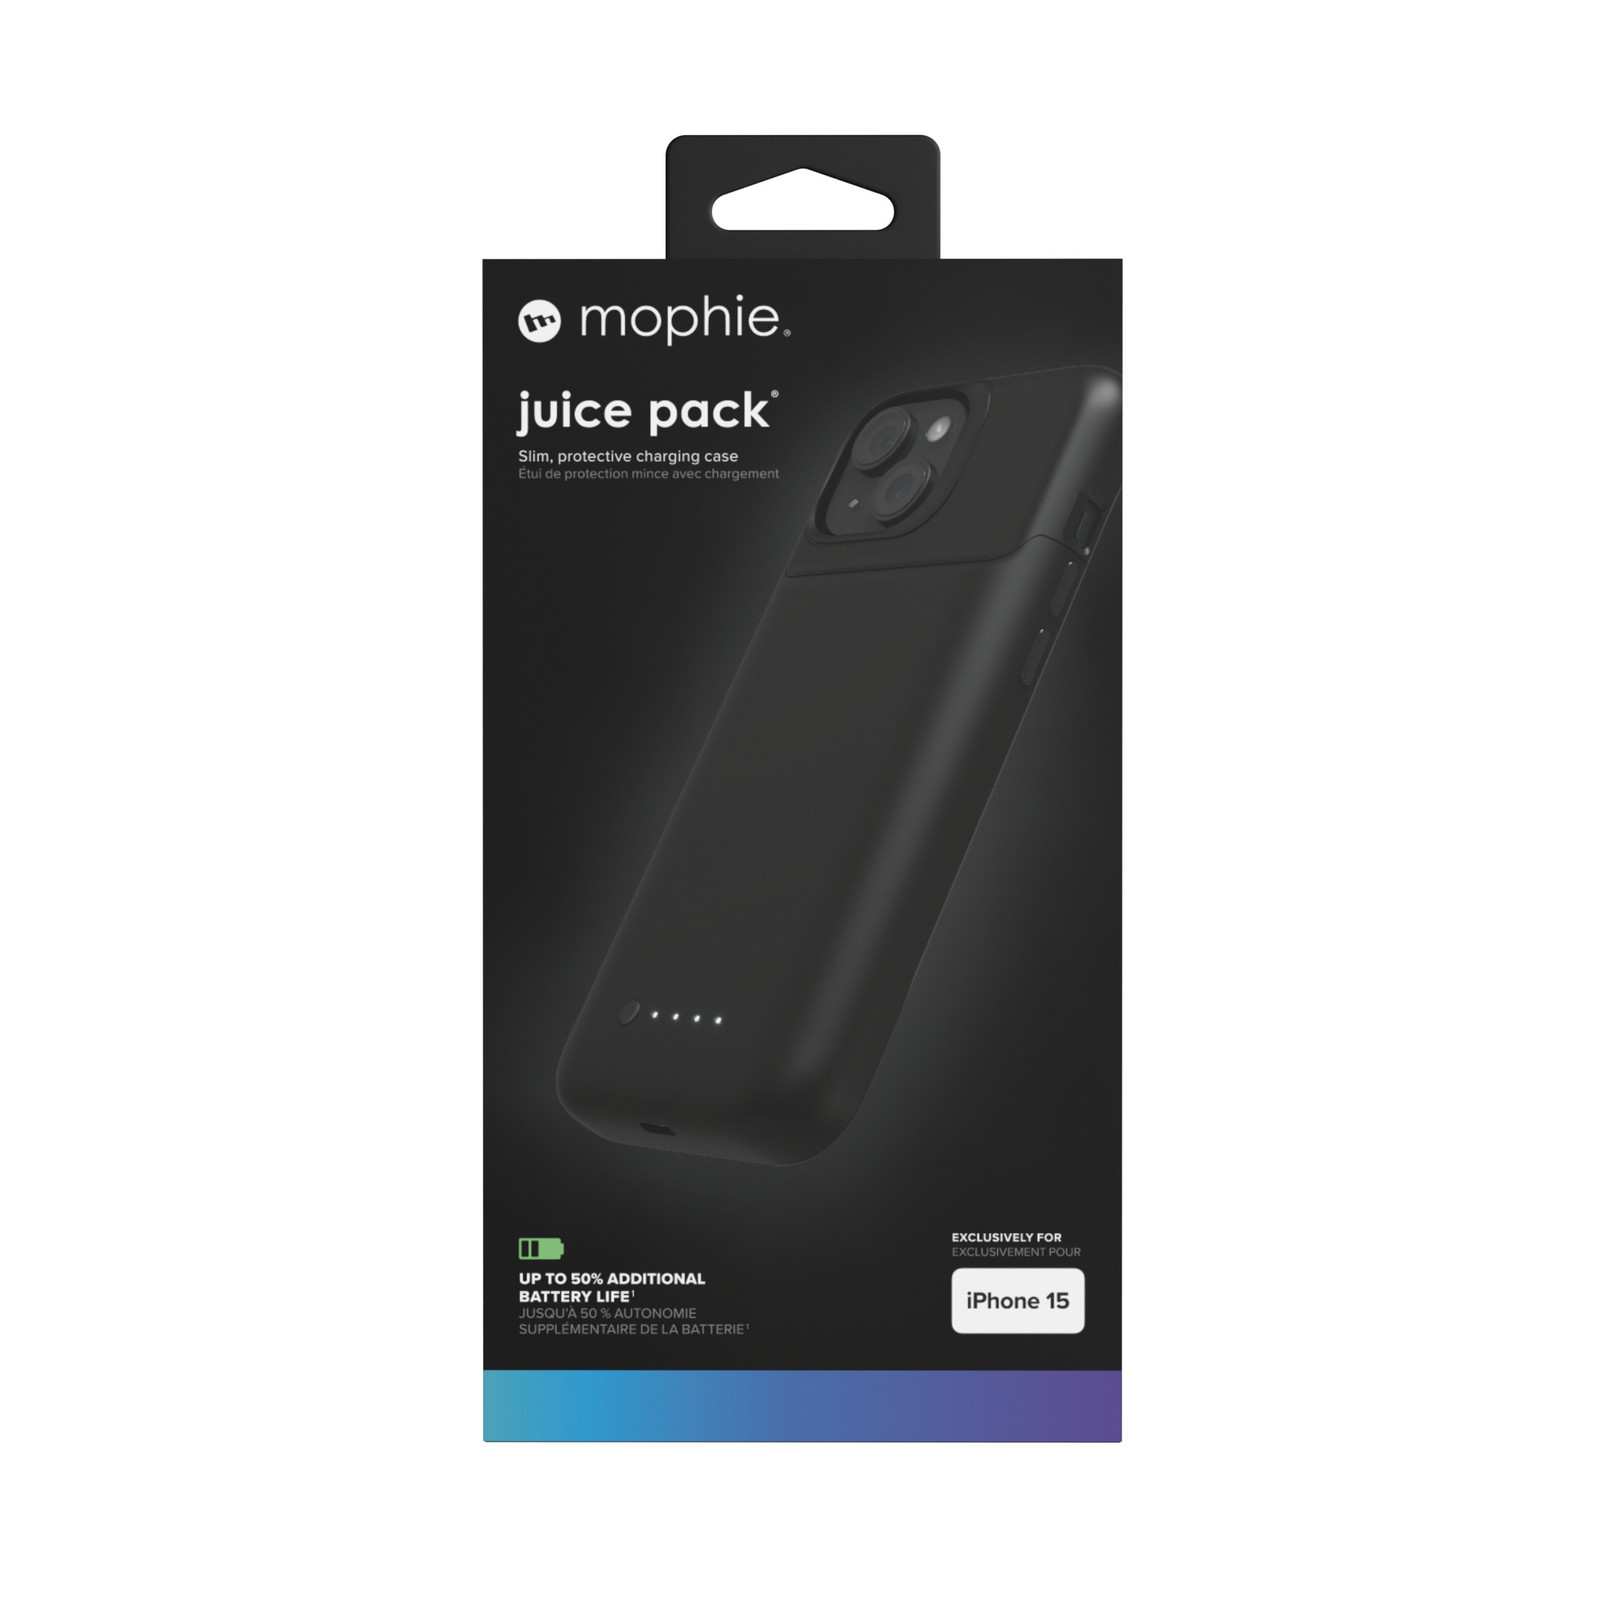 Pouzdro Mophie PowerBank 2400 mAh Battery Pack obal baterie pro iPhone 15